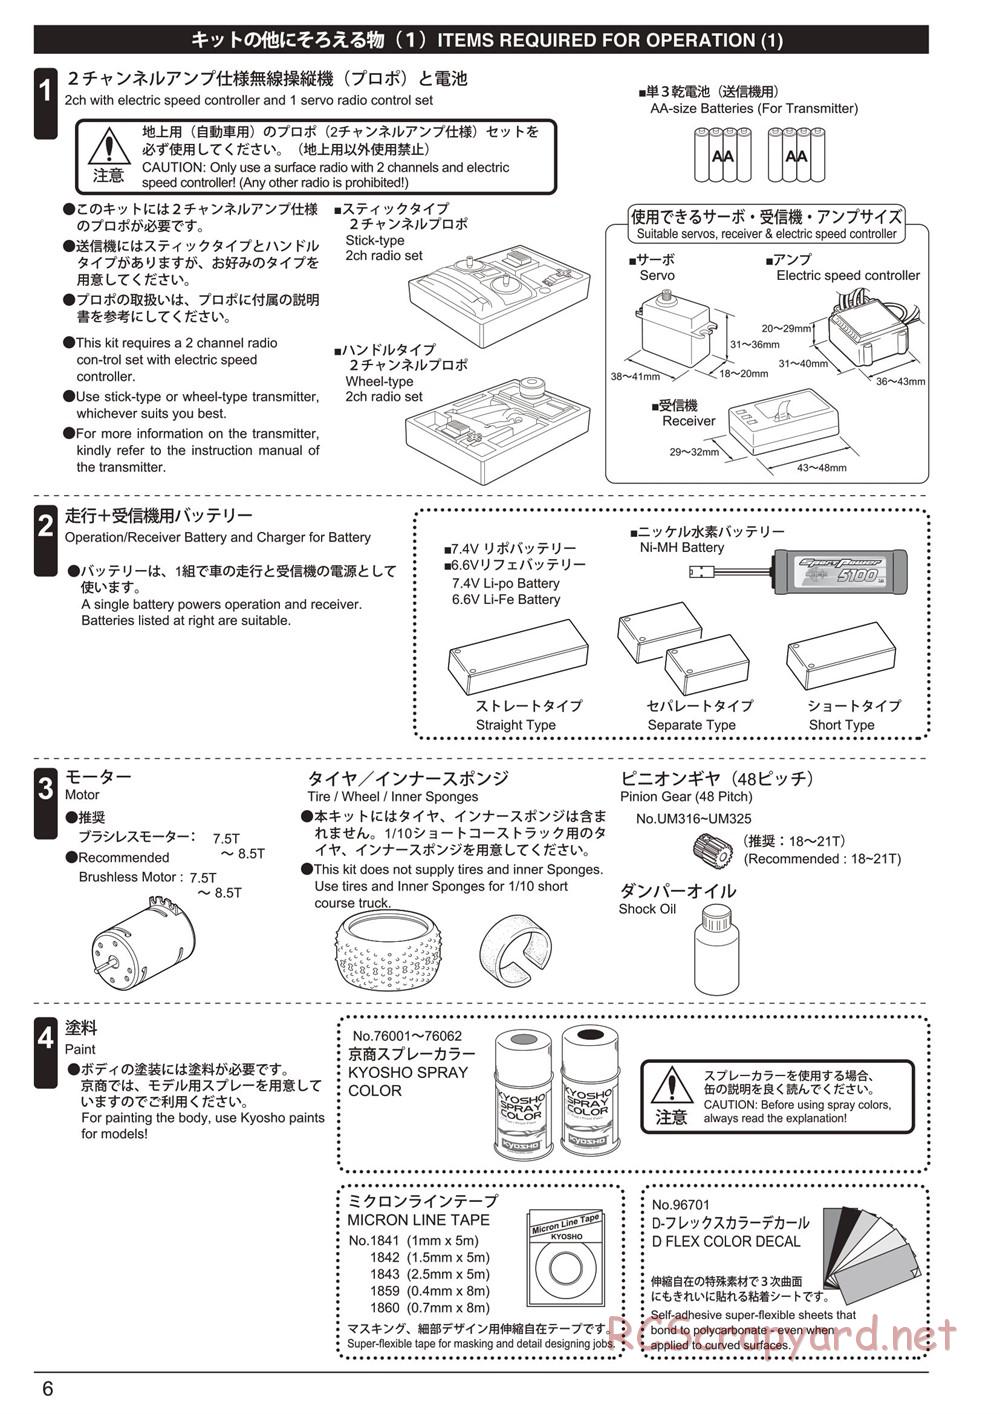 Kyosho - Ultima RB6 - Manual - Page 6